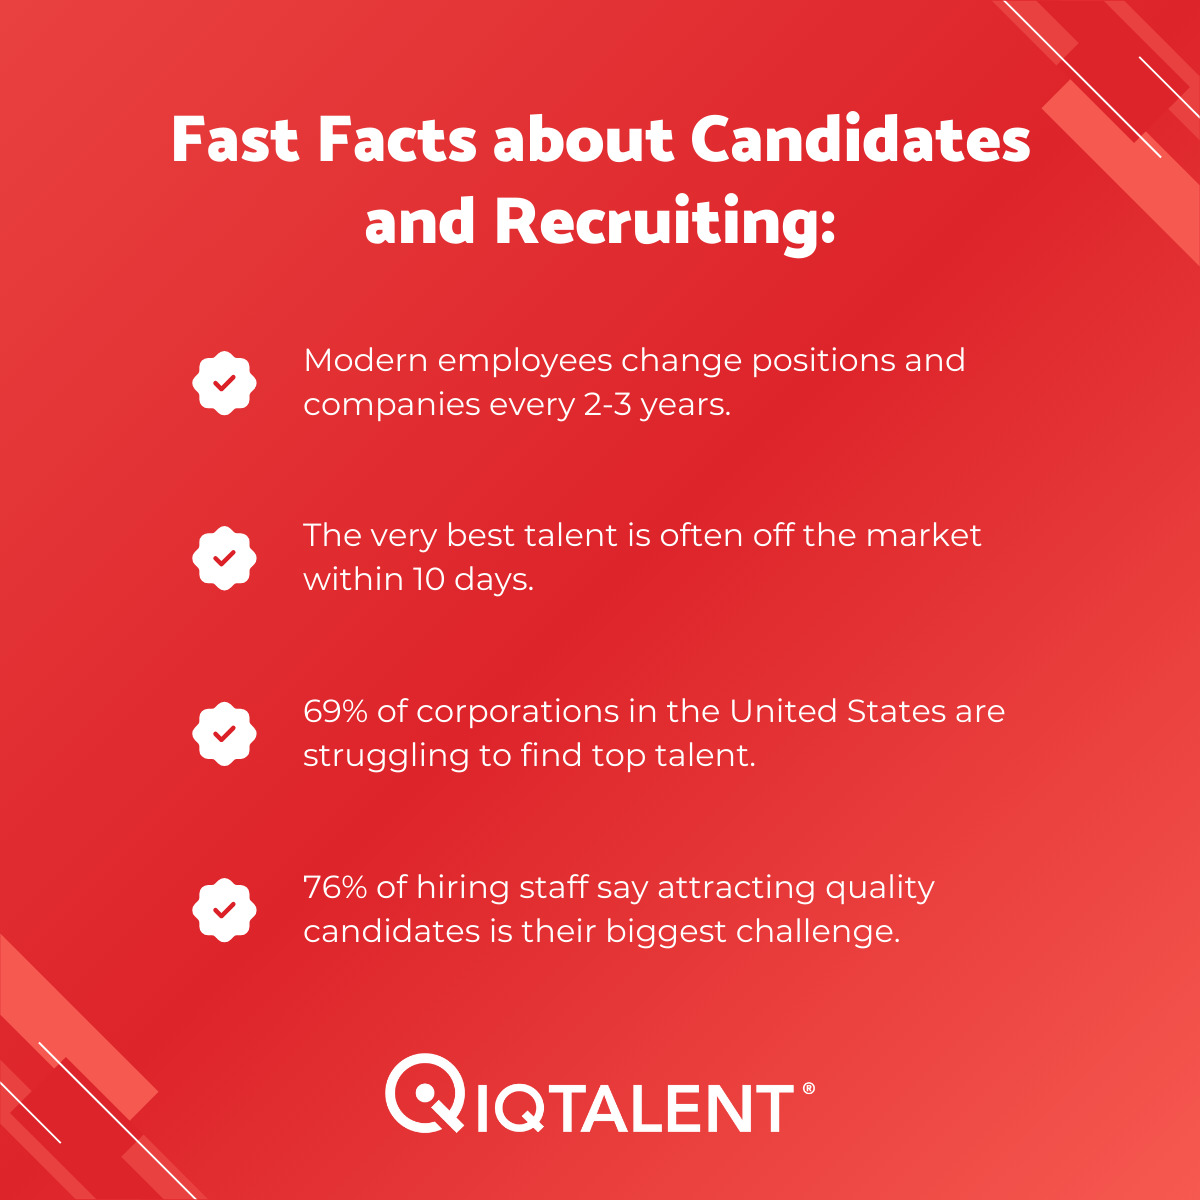 Fast Facts about Candidates and Recruiting